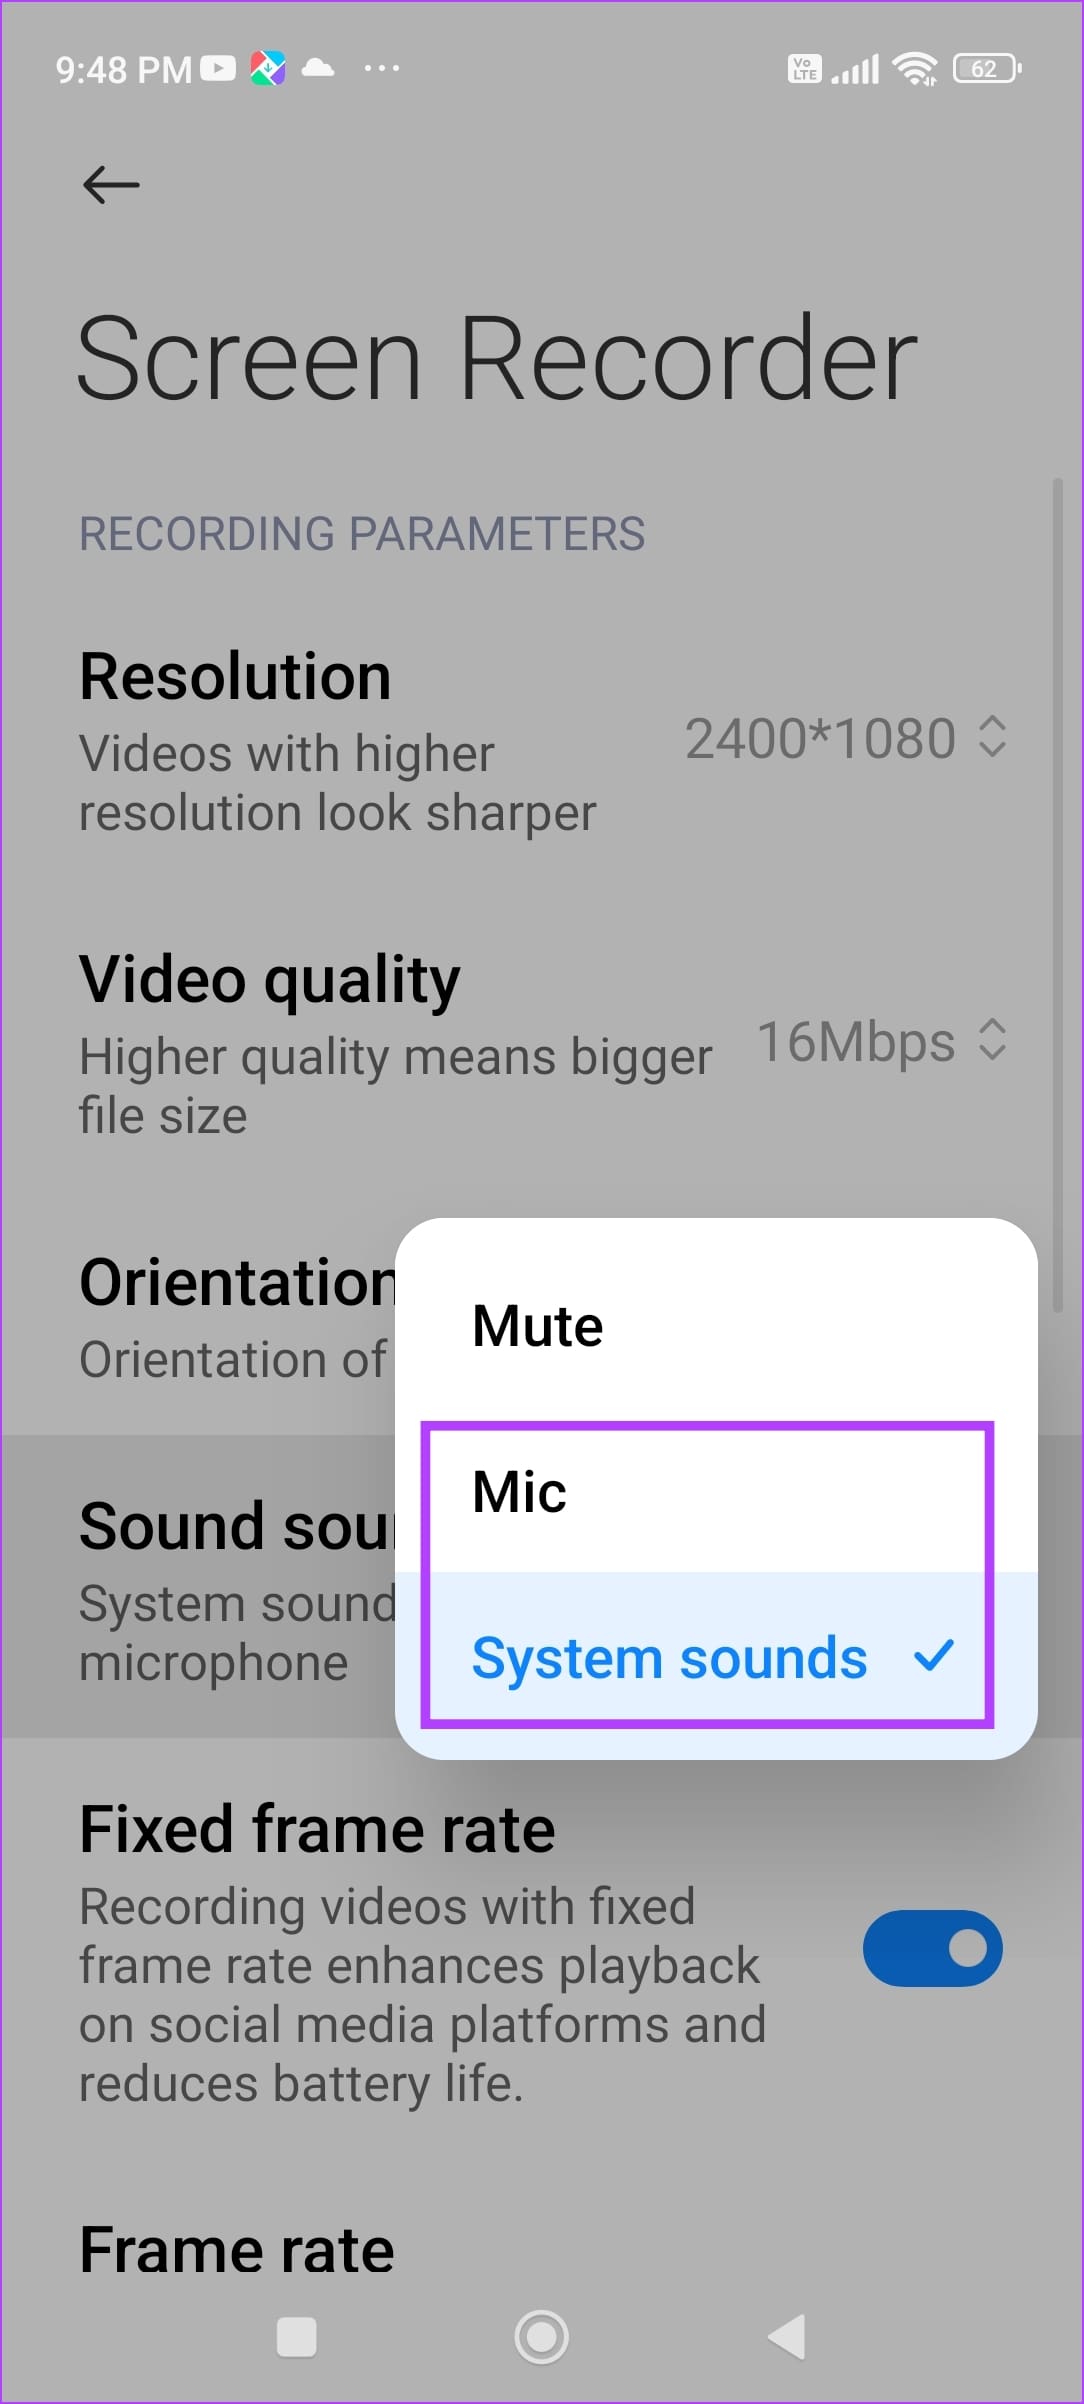 Mic or System Sounds